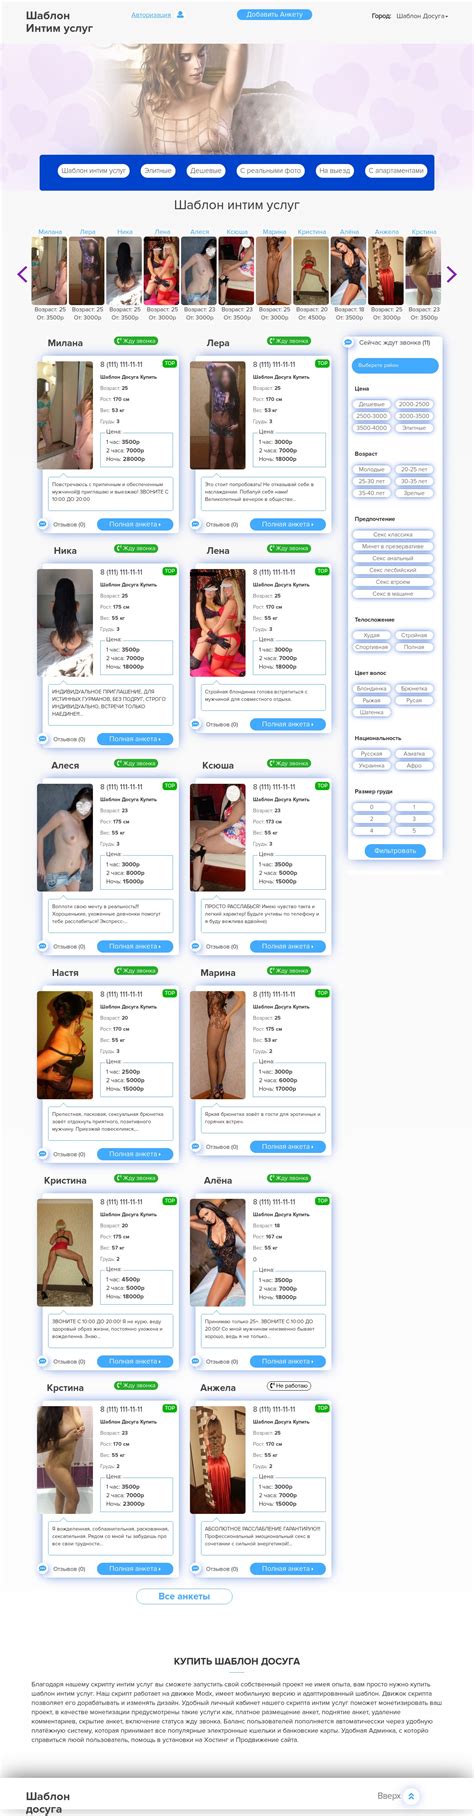 script site sex services at a price of 93€